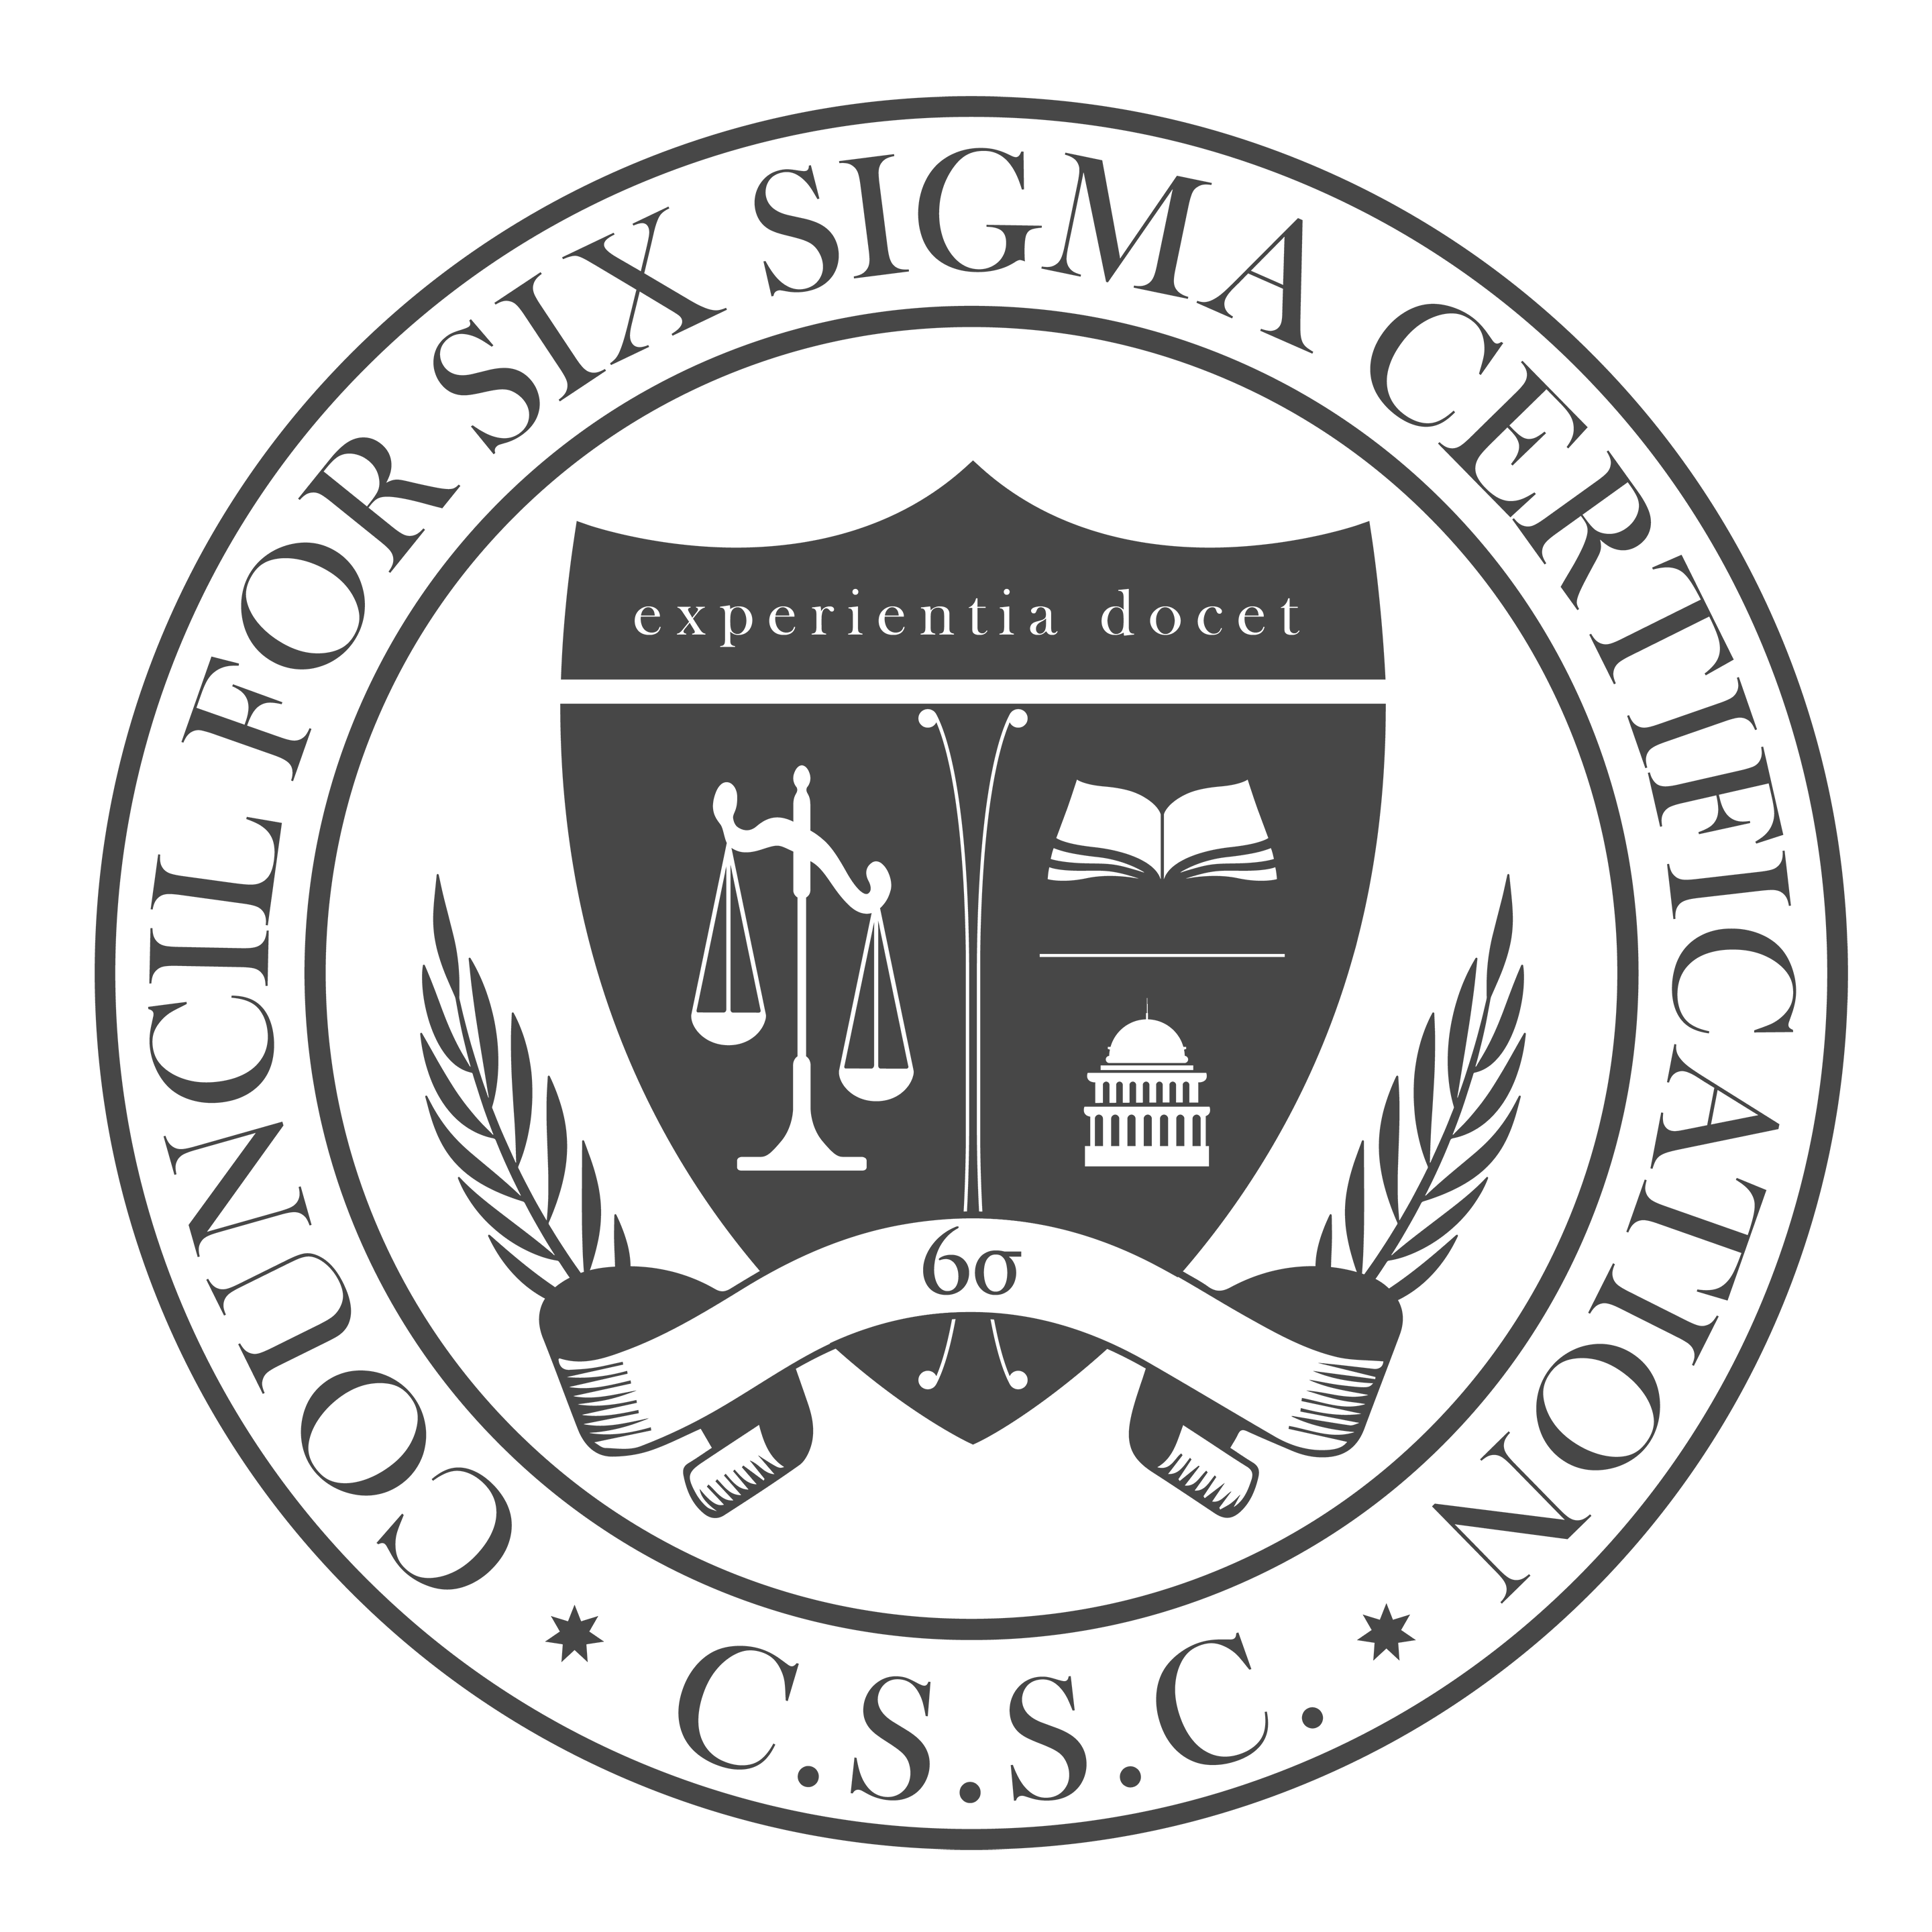 council for six sigma certification